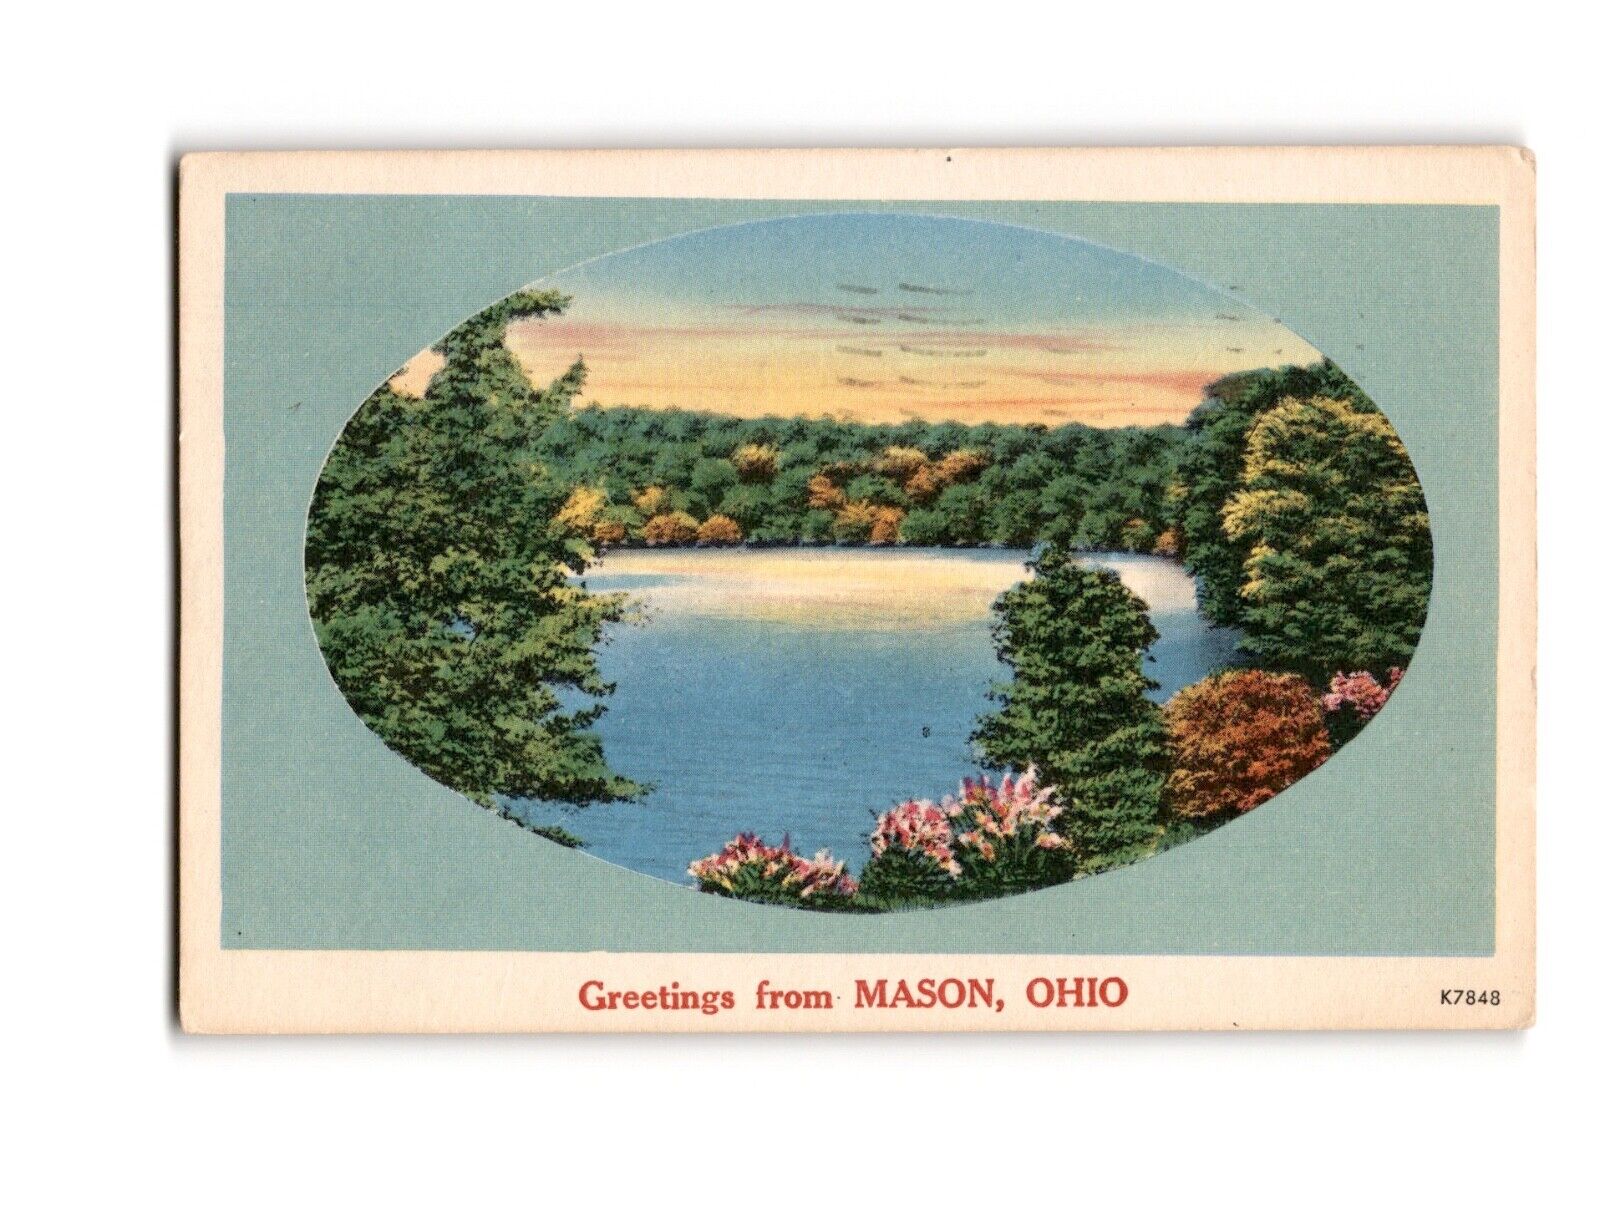 Greetings from MASON, OHIO Vintage Postcard 1956 Posted